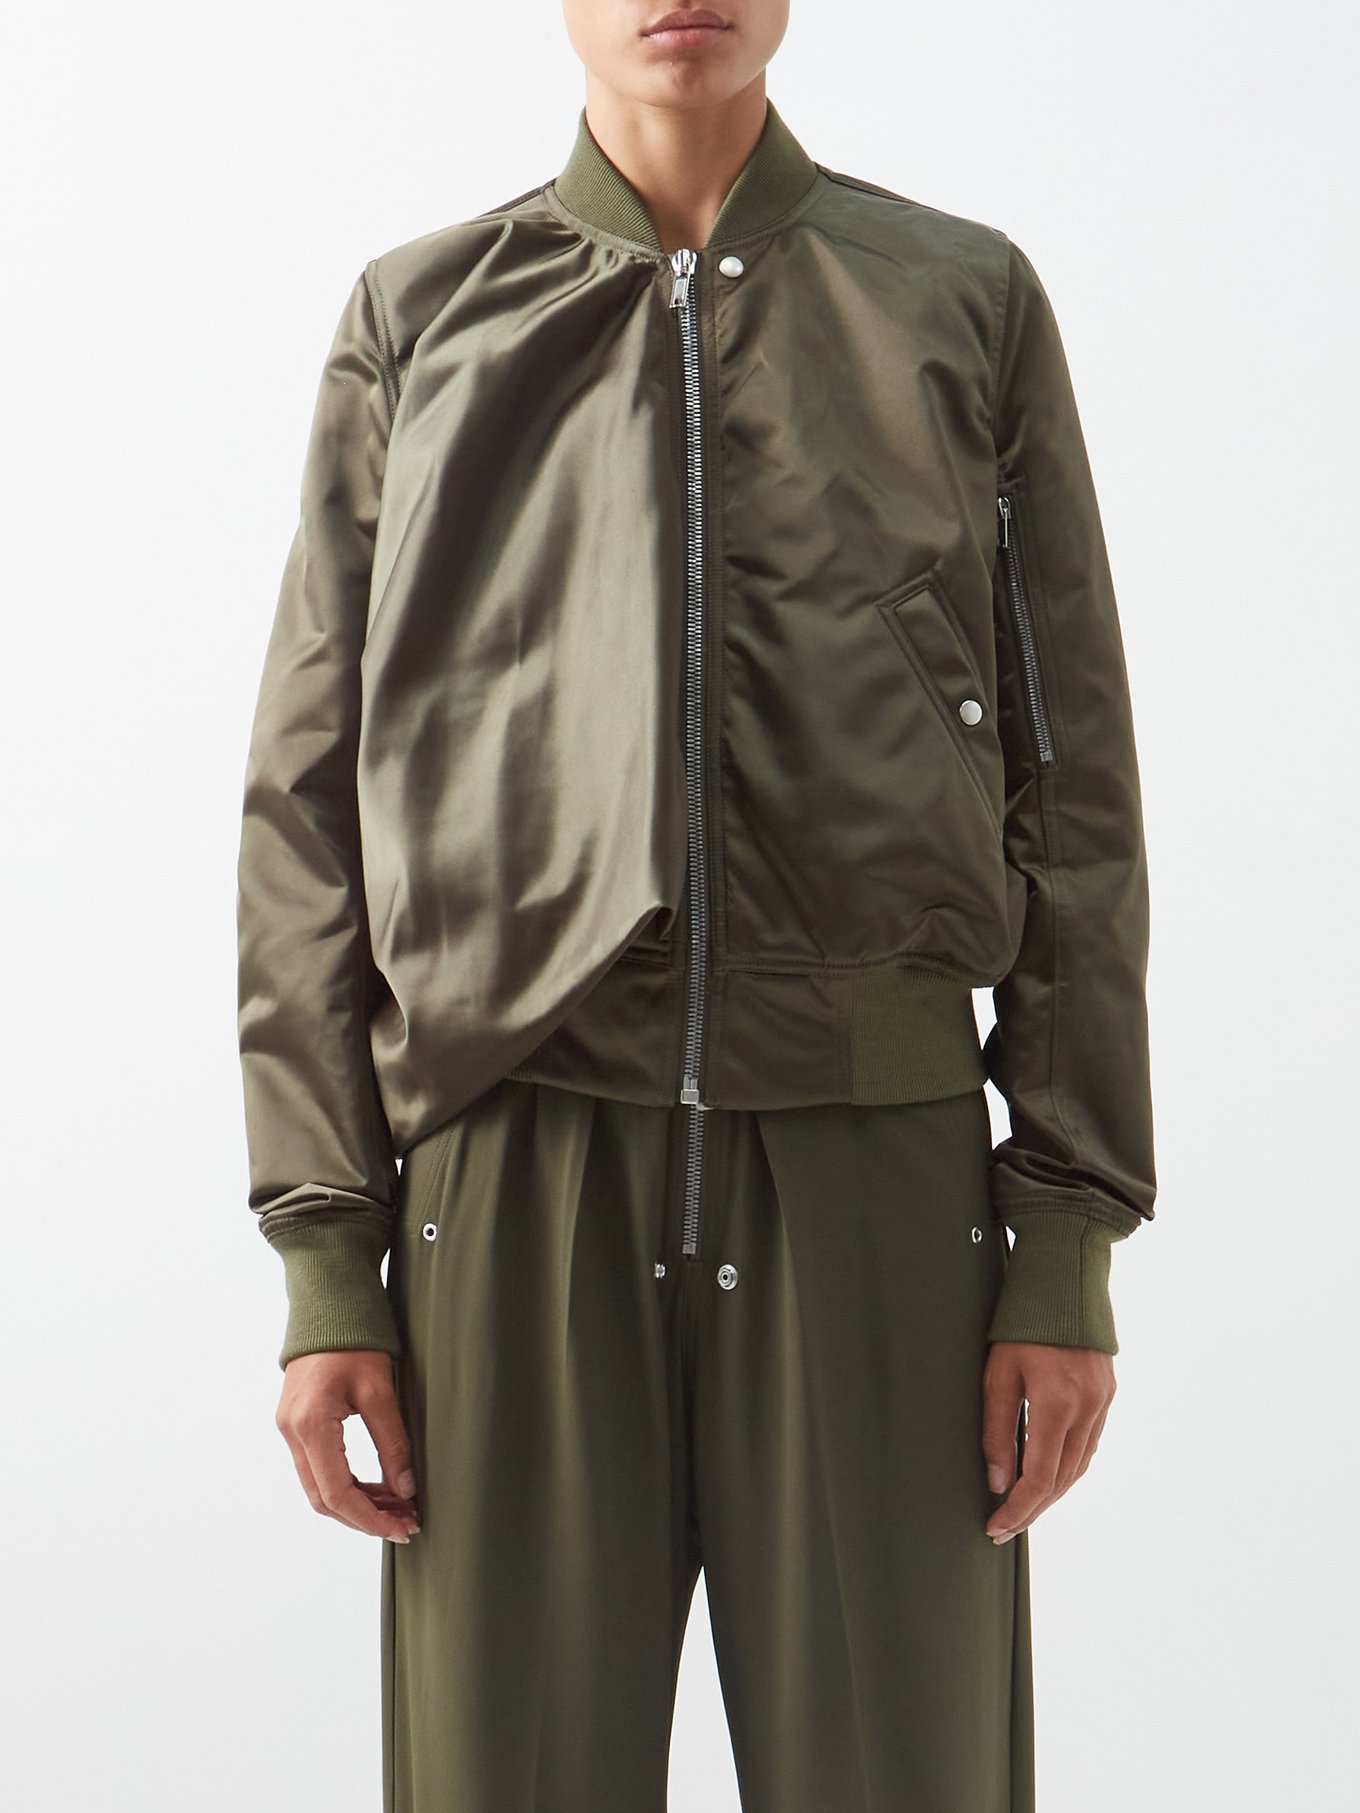 Banzai I særdeleshed Implement Green Seb recycled-satin bomber jacket | Rick Owens | MATCHESFASHION US